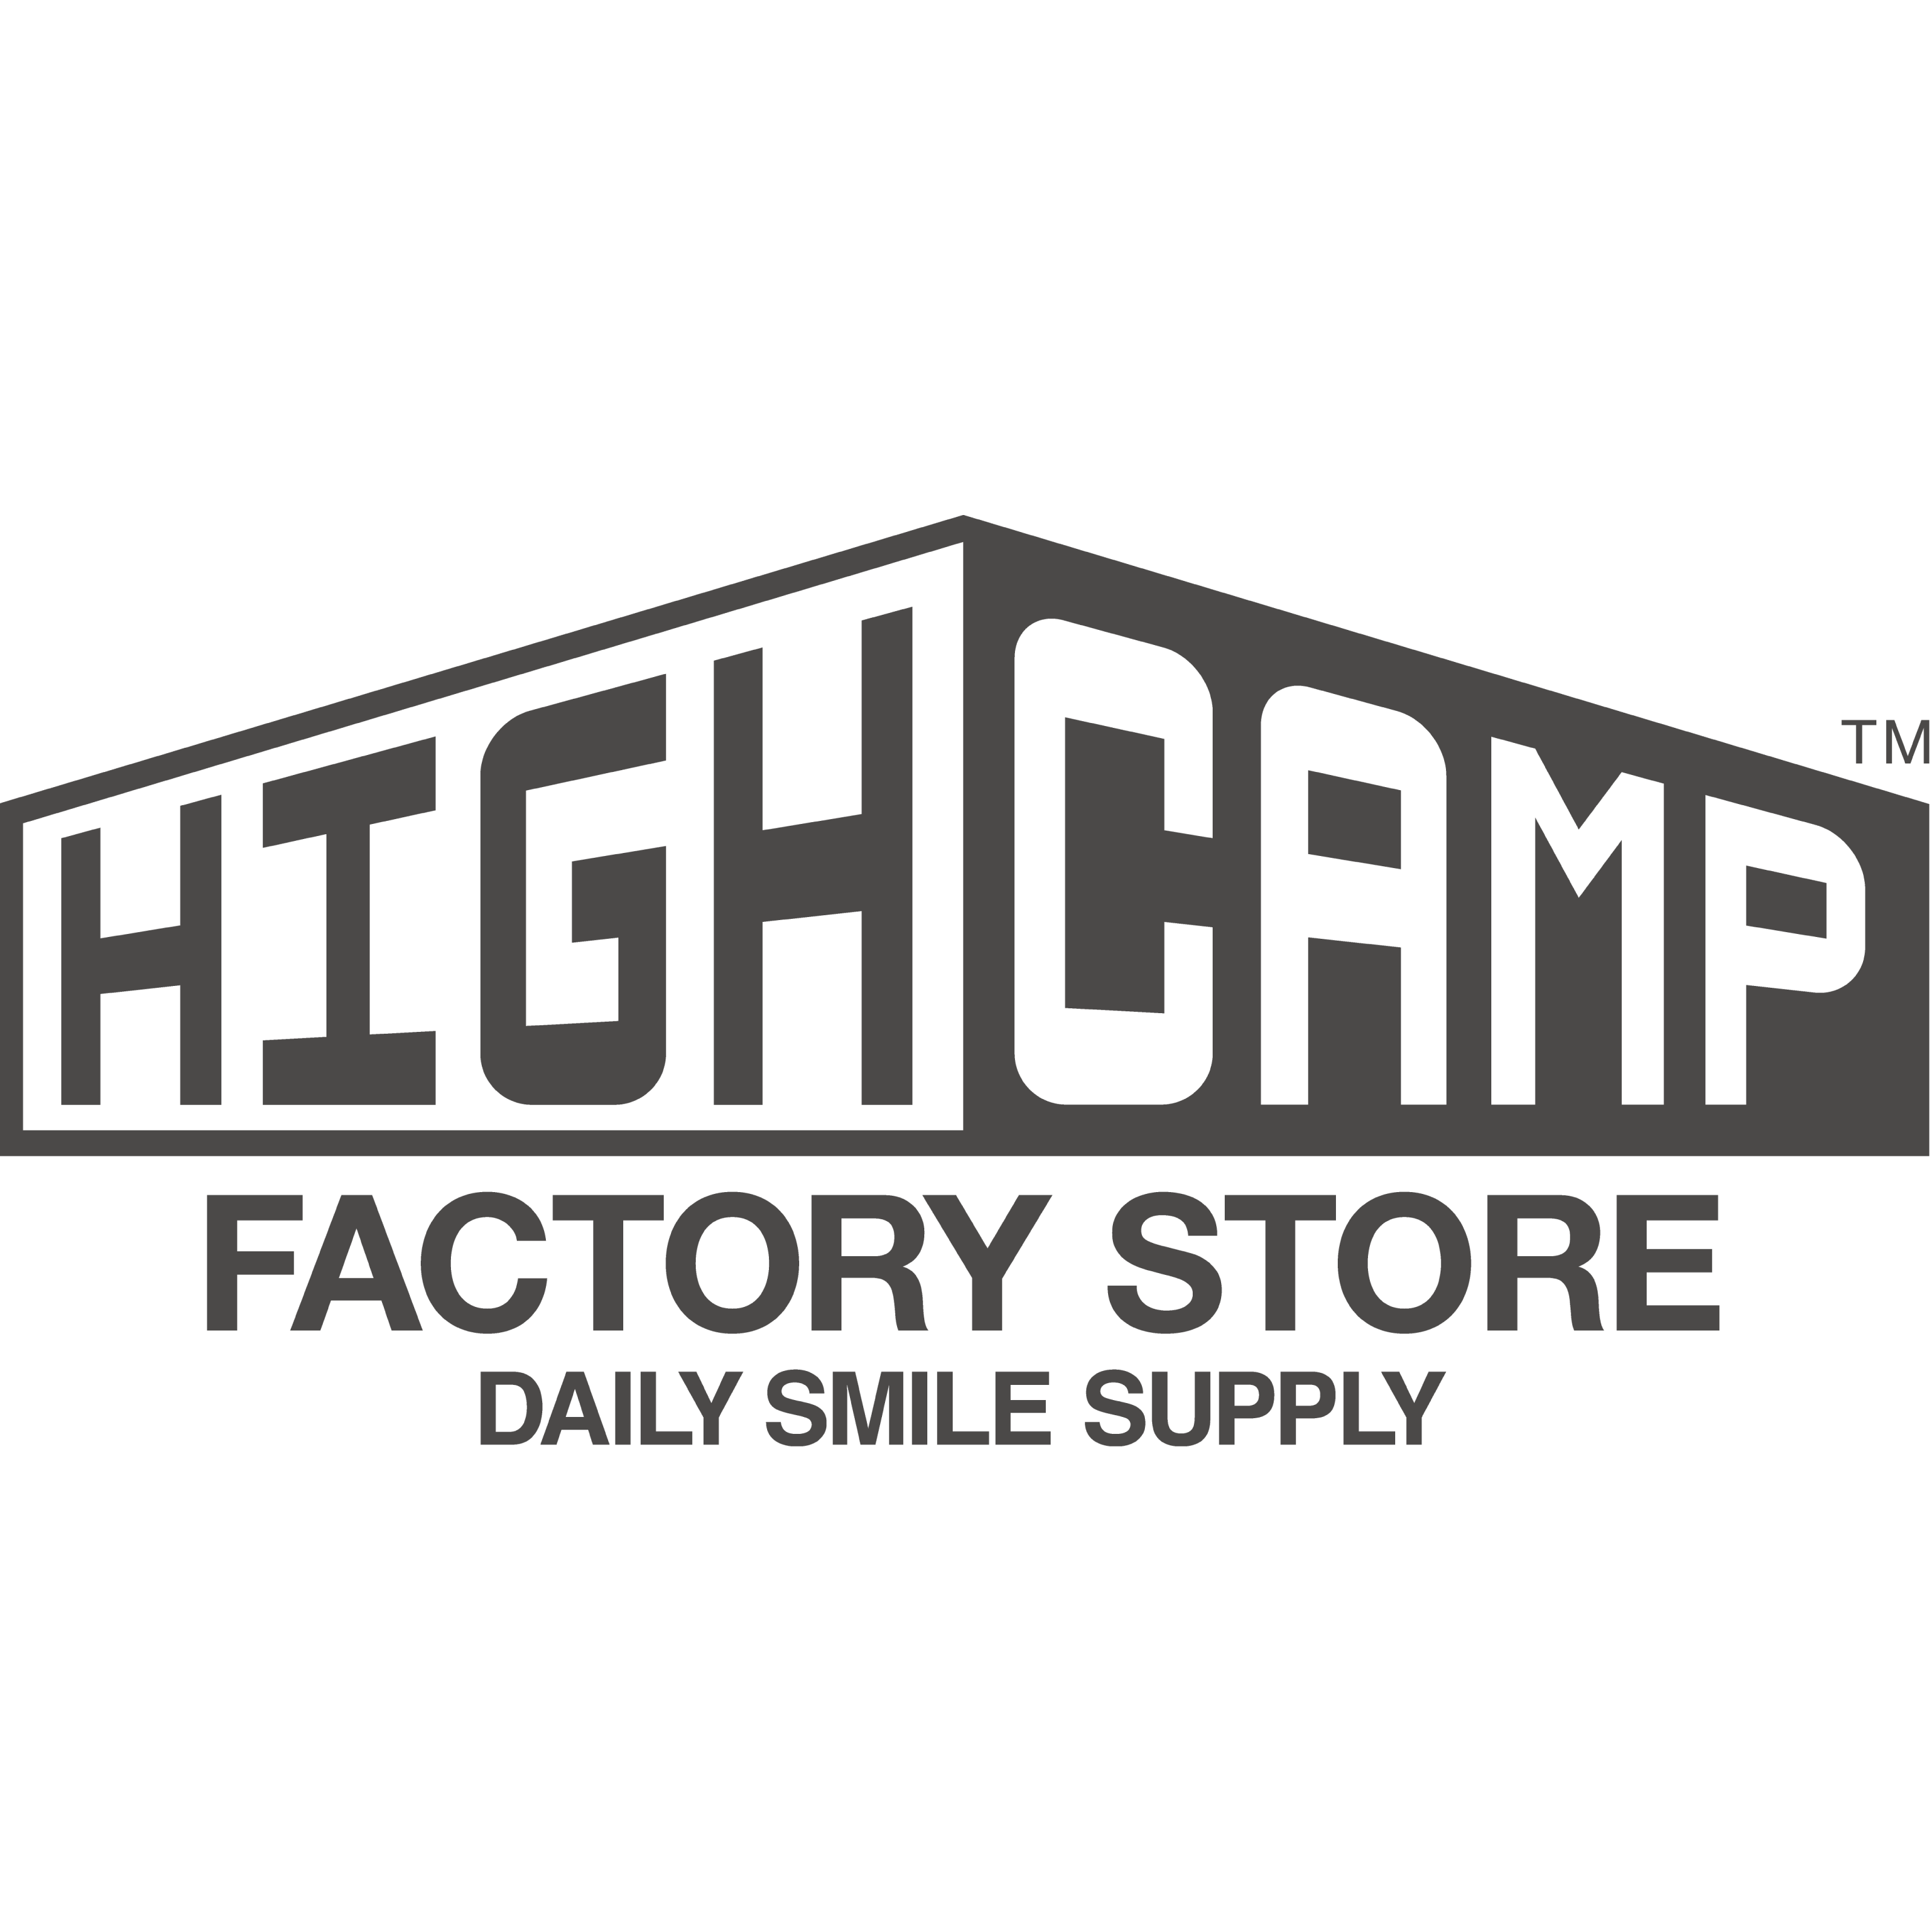 HIGHCAMP FACTORY STORE